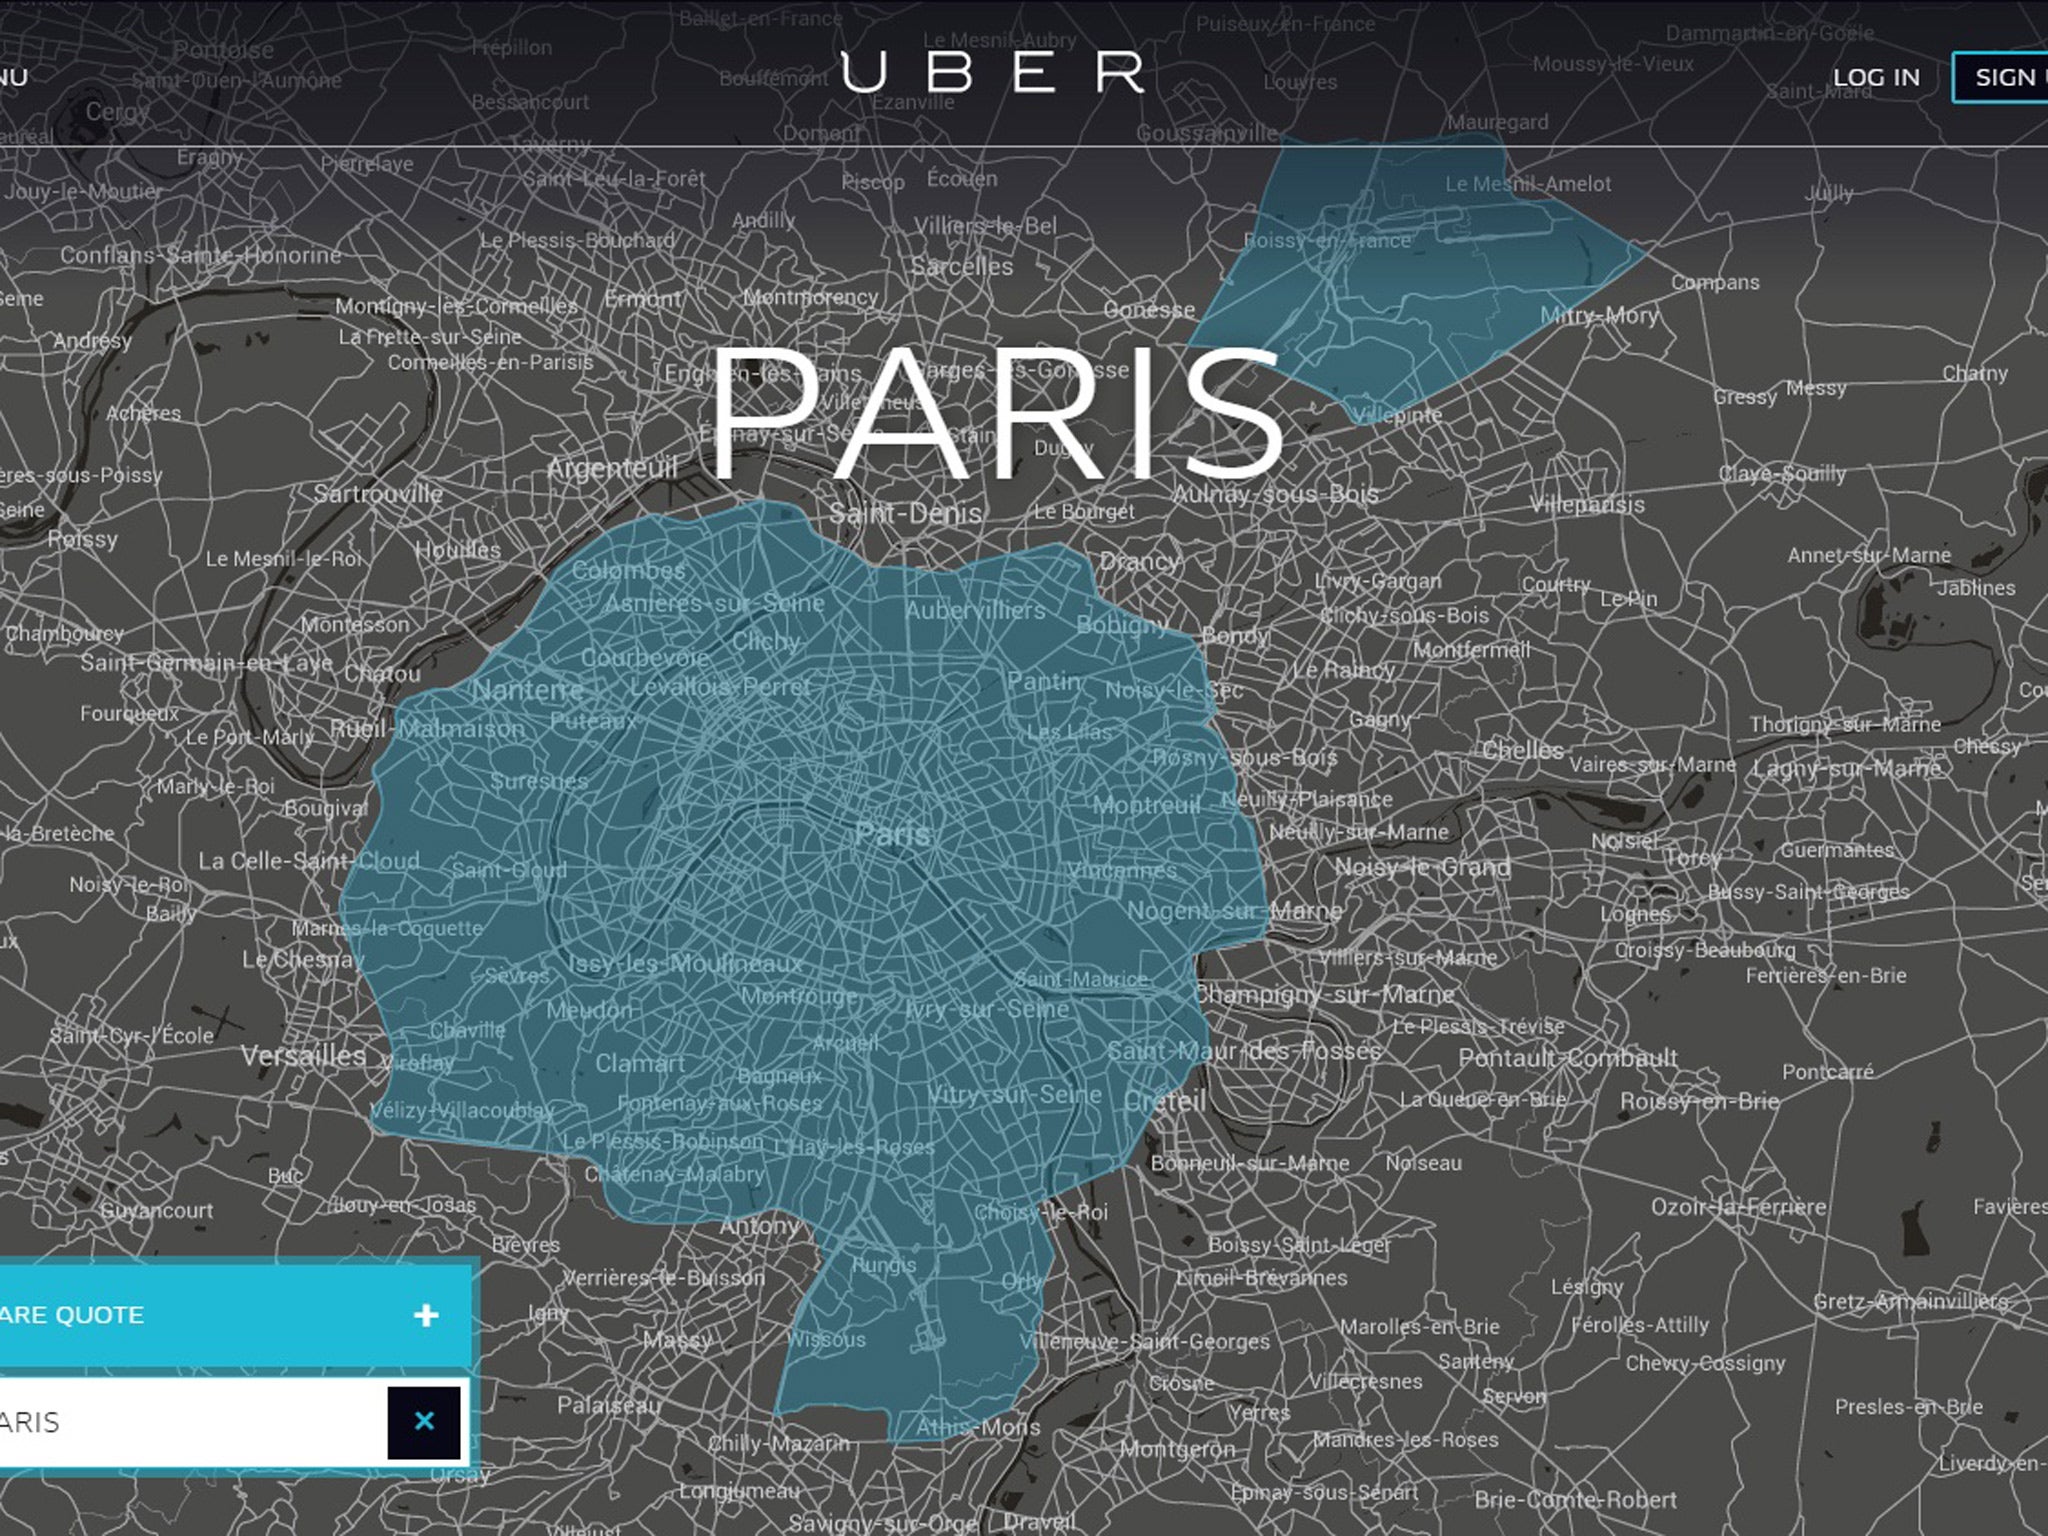 Uber's French website, showing the area it covers in Paris